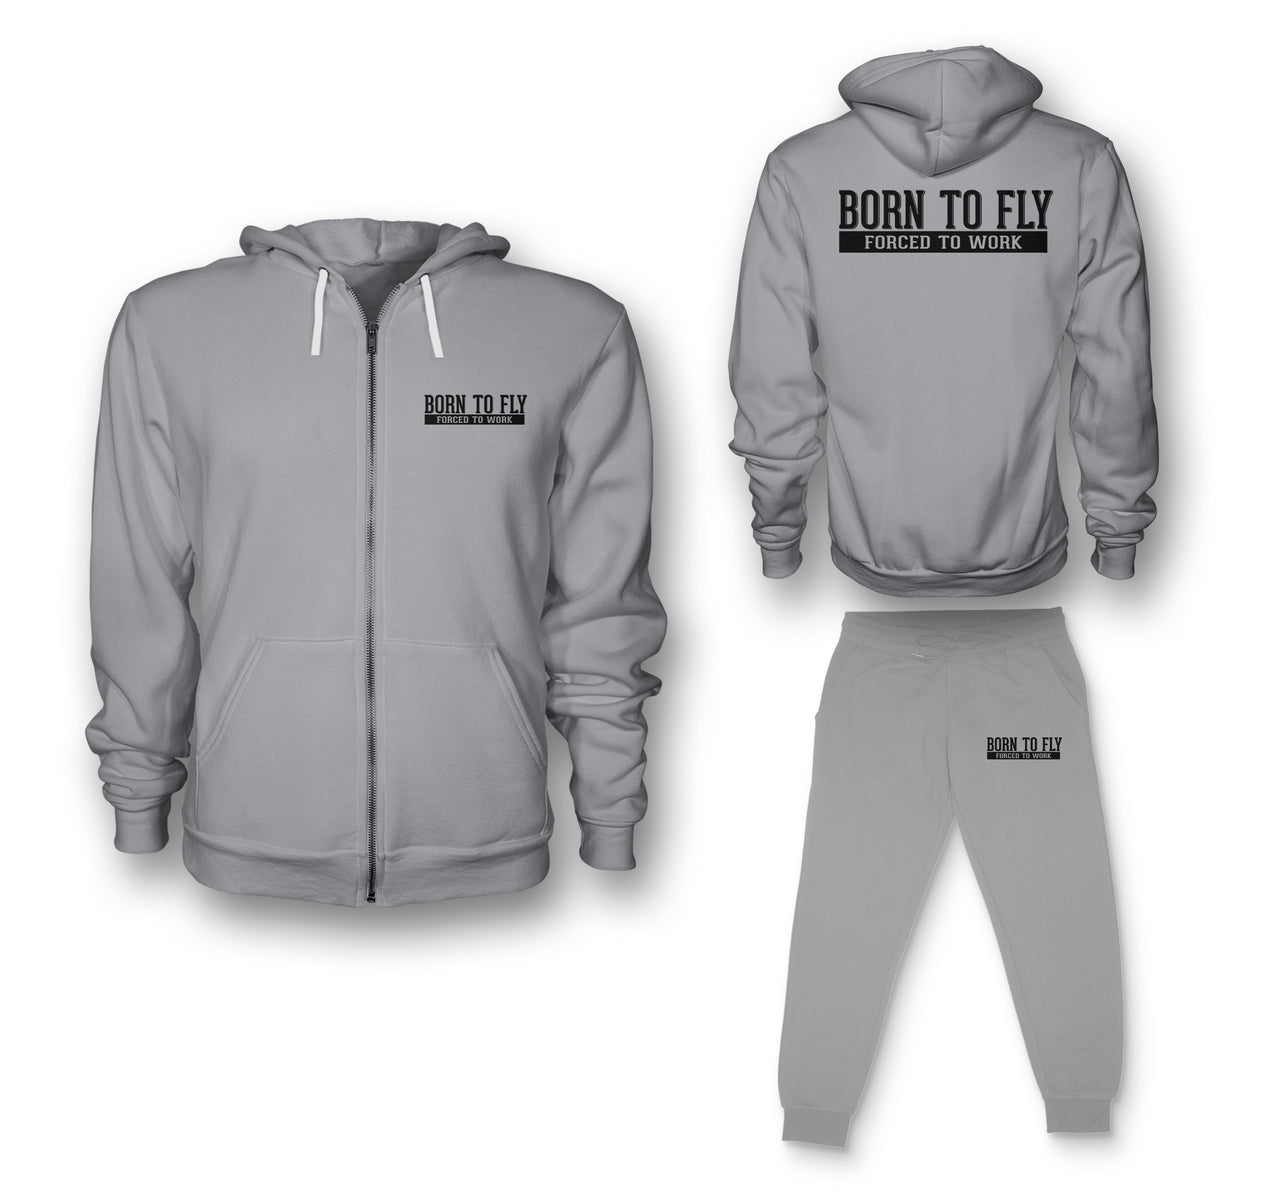 Born To Fly Forced To Work Designed Zipped Hoodies & Sweatpants Set